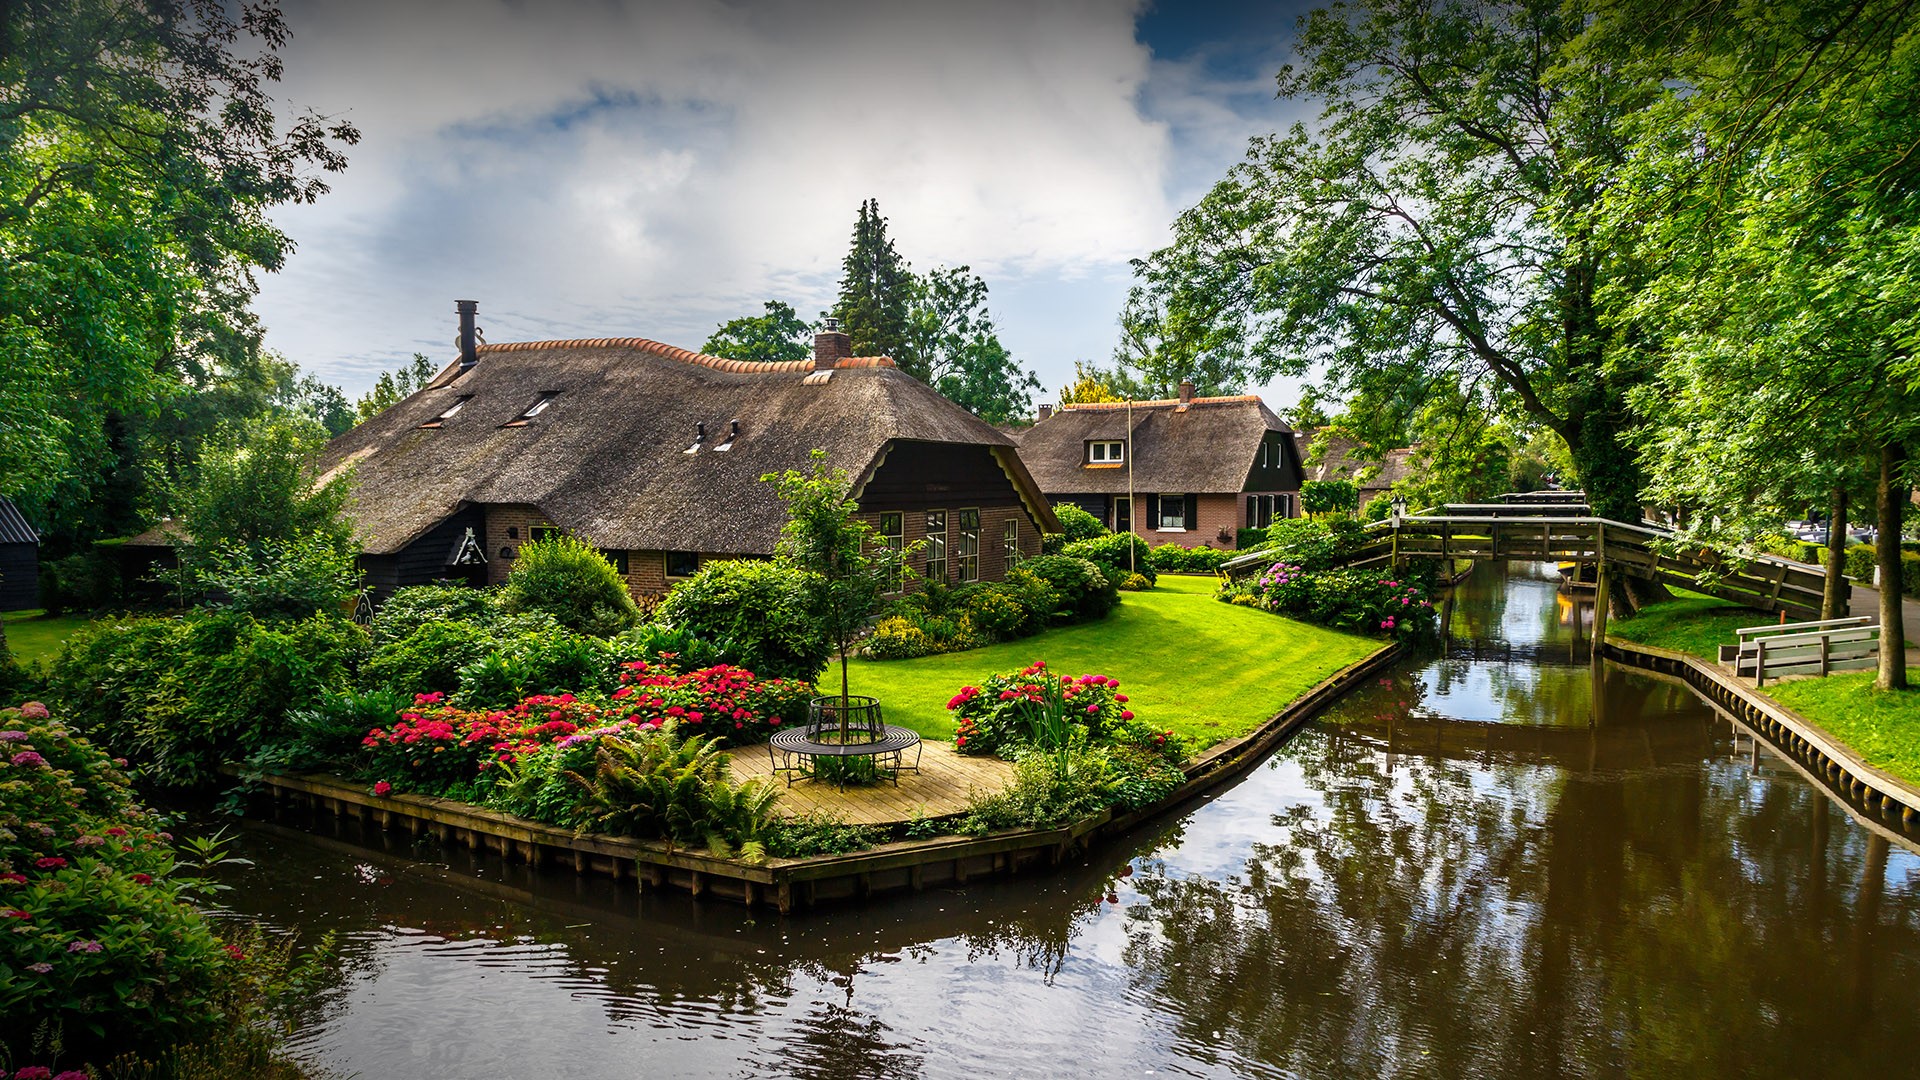 View of Giethoorn village with canals and rustic thatched roof houses ...